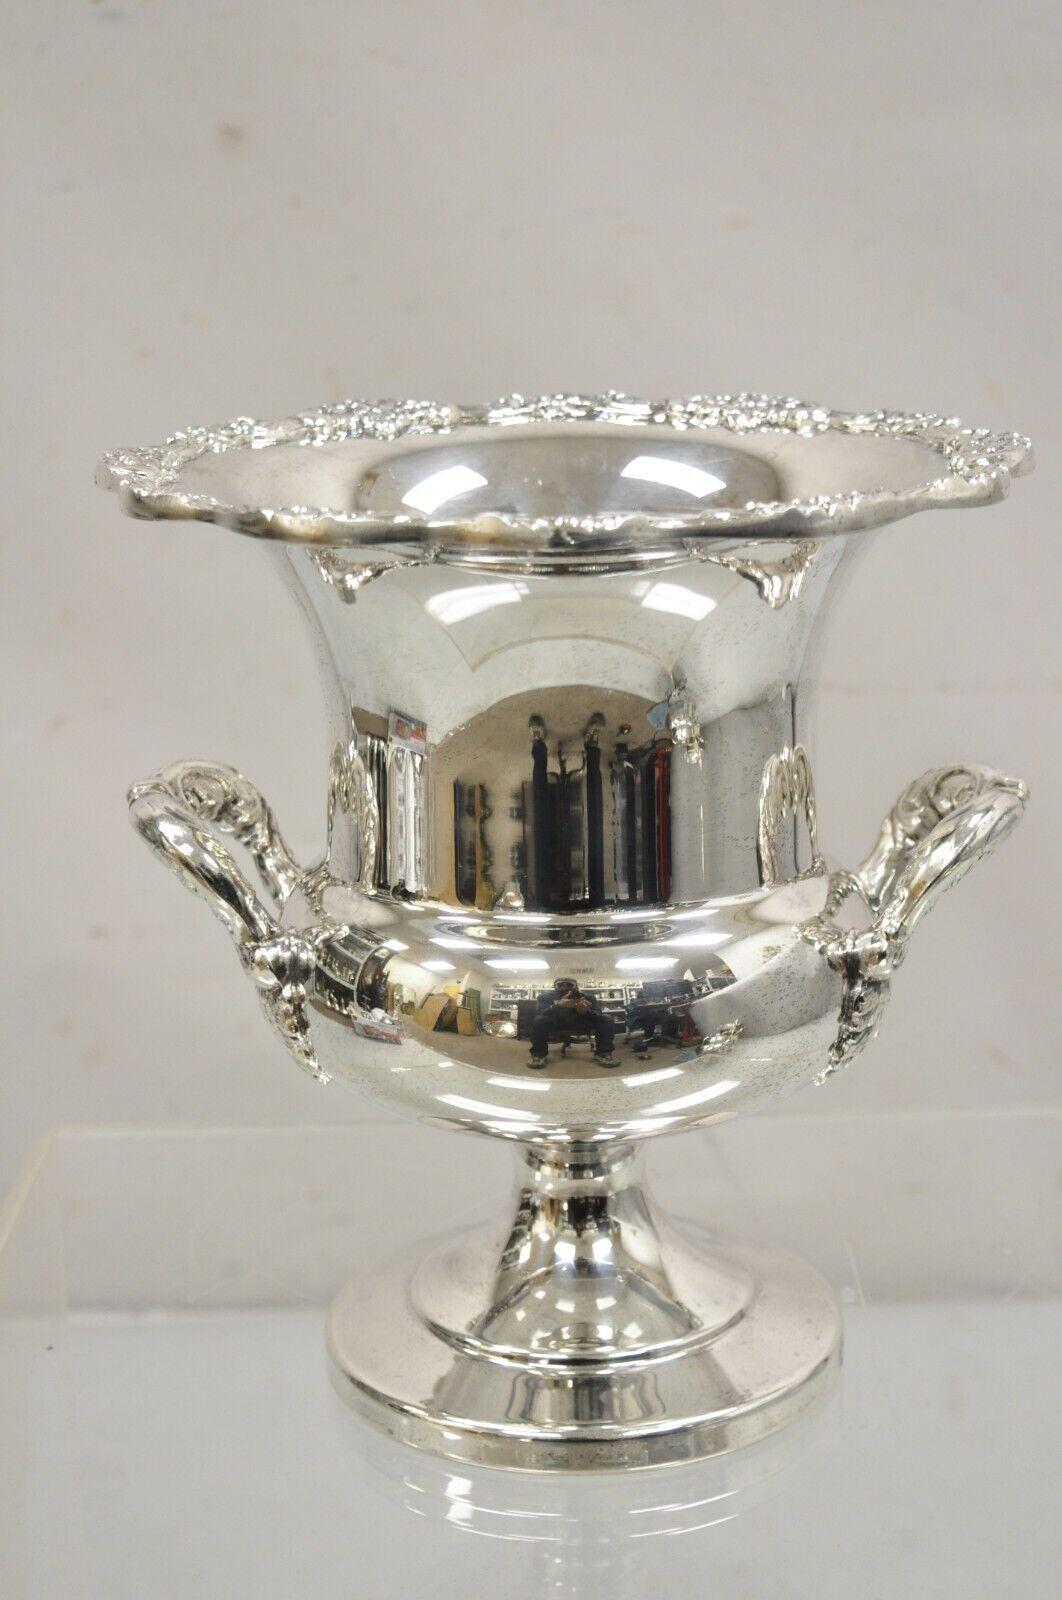 Vintage Towle Regency Style Silver Plated Trophy Cup Ice Bucket Champagne Chiller. Circa Mid 20th Century. Measurements: 10